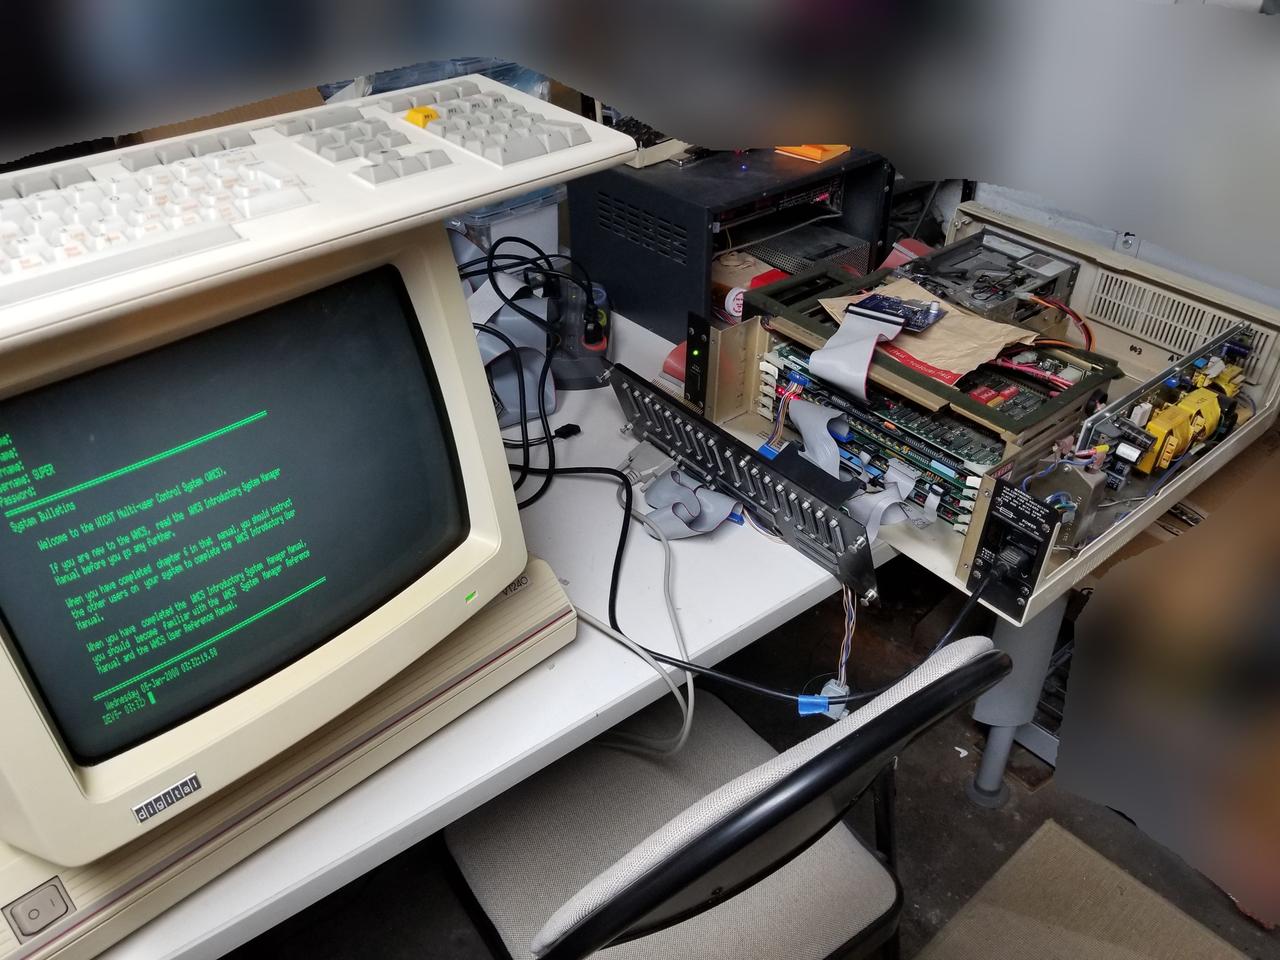 A picture of the ZuluSCSI running inside our WICAT S2150, connected to a DEC VT240 with colour VR241 monitor.